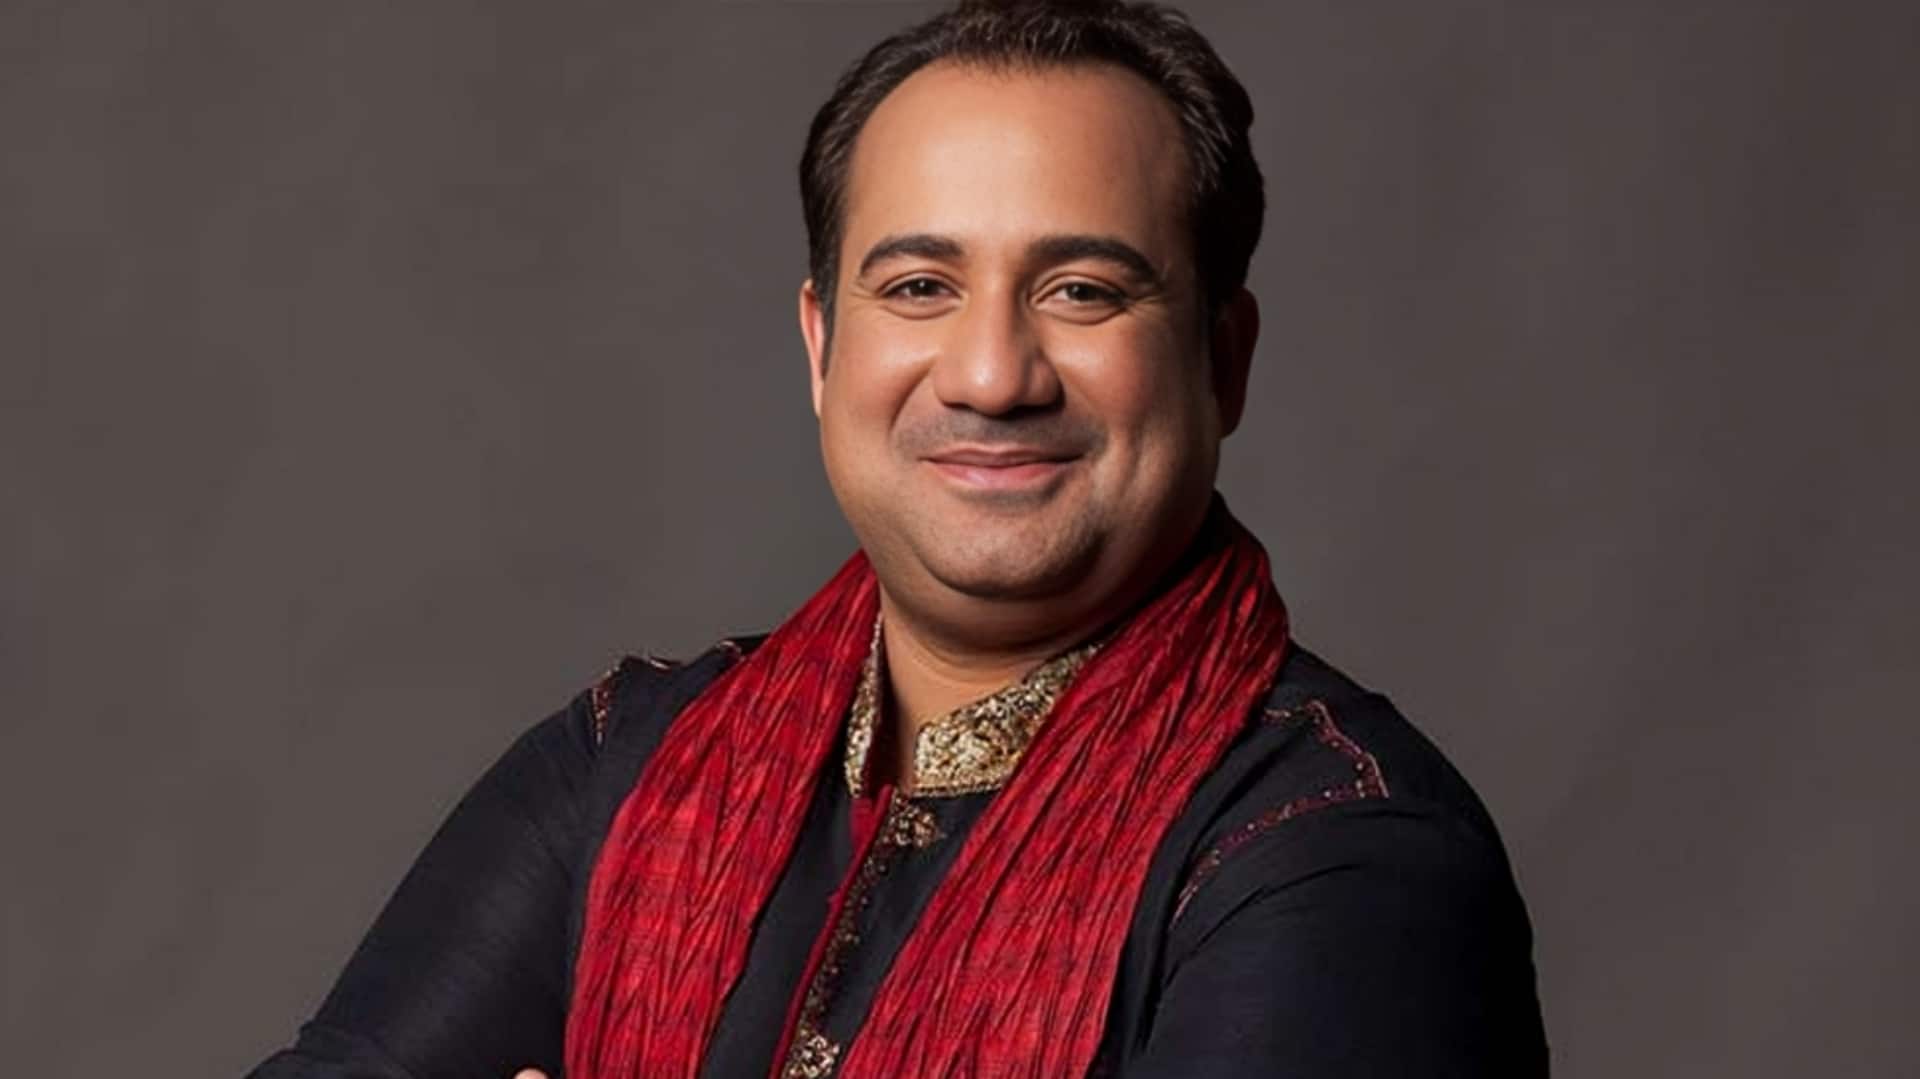 Why netizens are blasting Rahat Fateh Ali Khan: Controversy explained